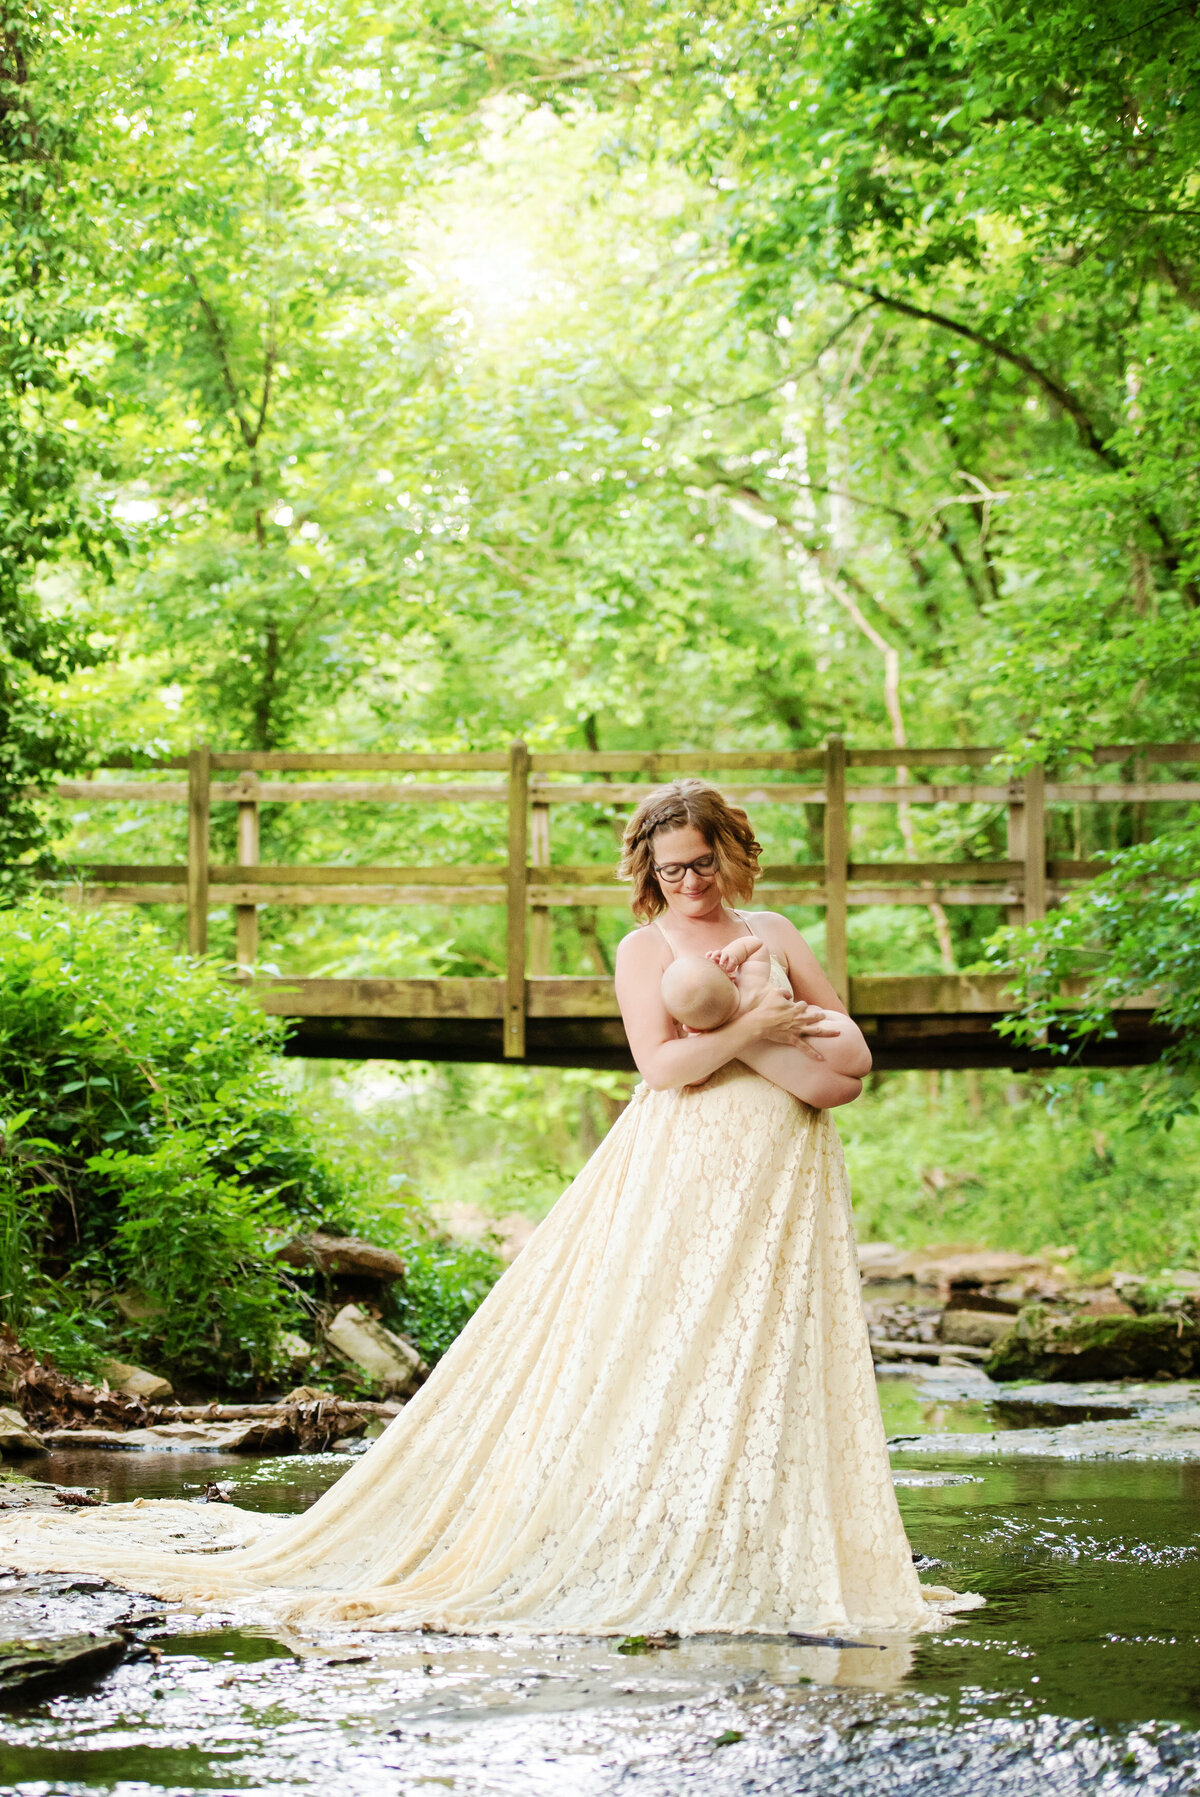 st-louis-motherhood-photographer-mother-in-lace-gown-cradling-baby-standing-in-creek-with-greenery-and-bridge-in-background